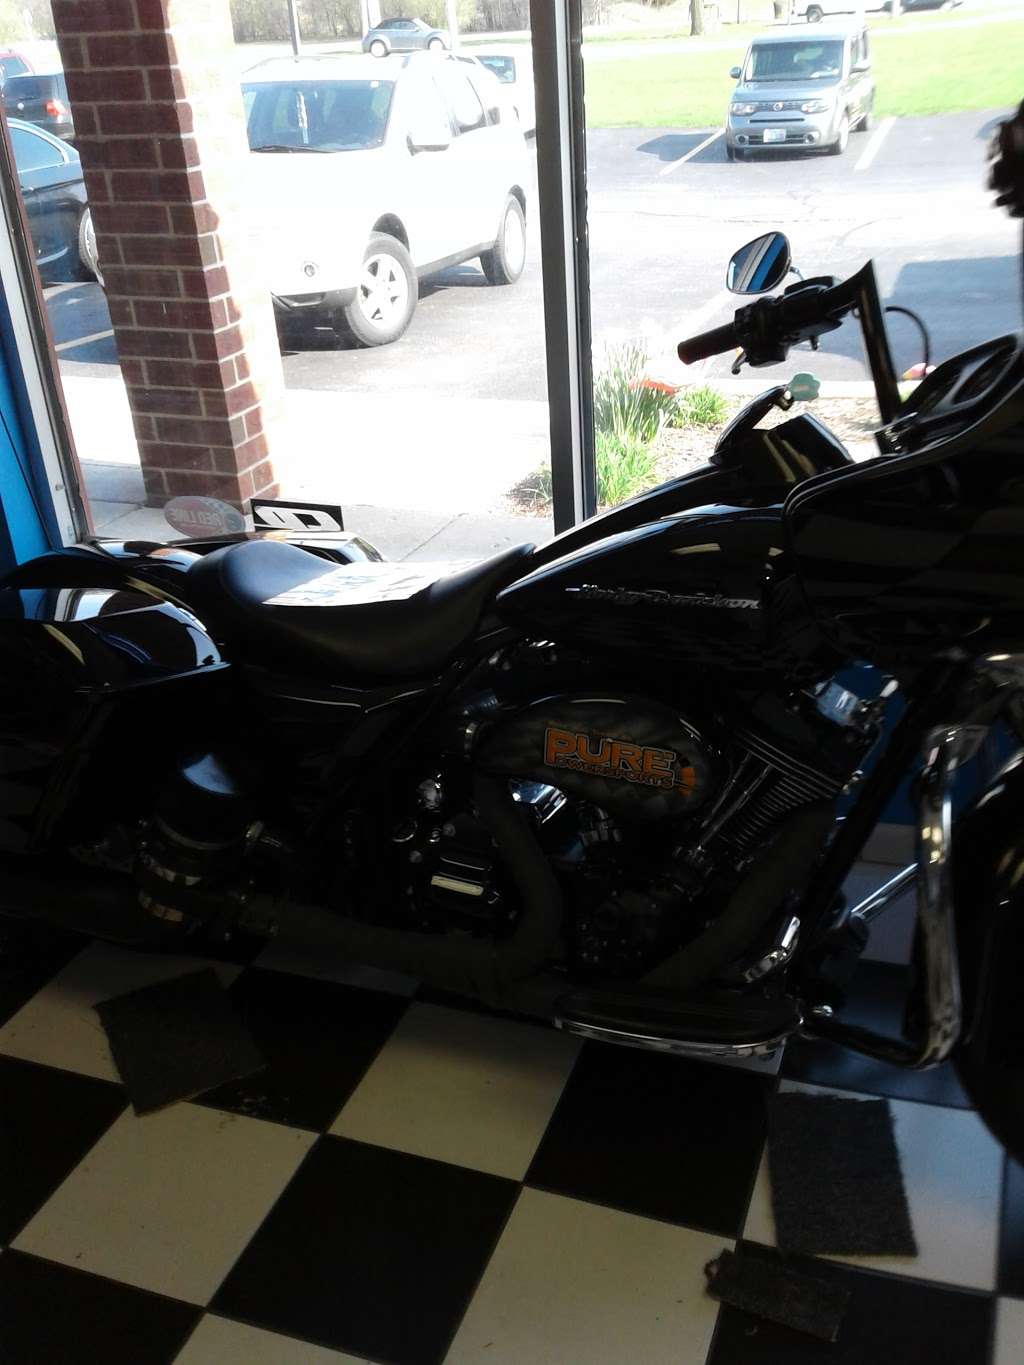 Pure Powersports | 3980 W Albany St, McHenry, IL 60050 | Phone: (815) 788-1500